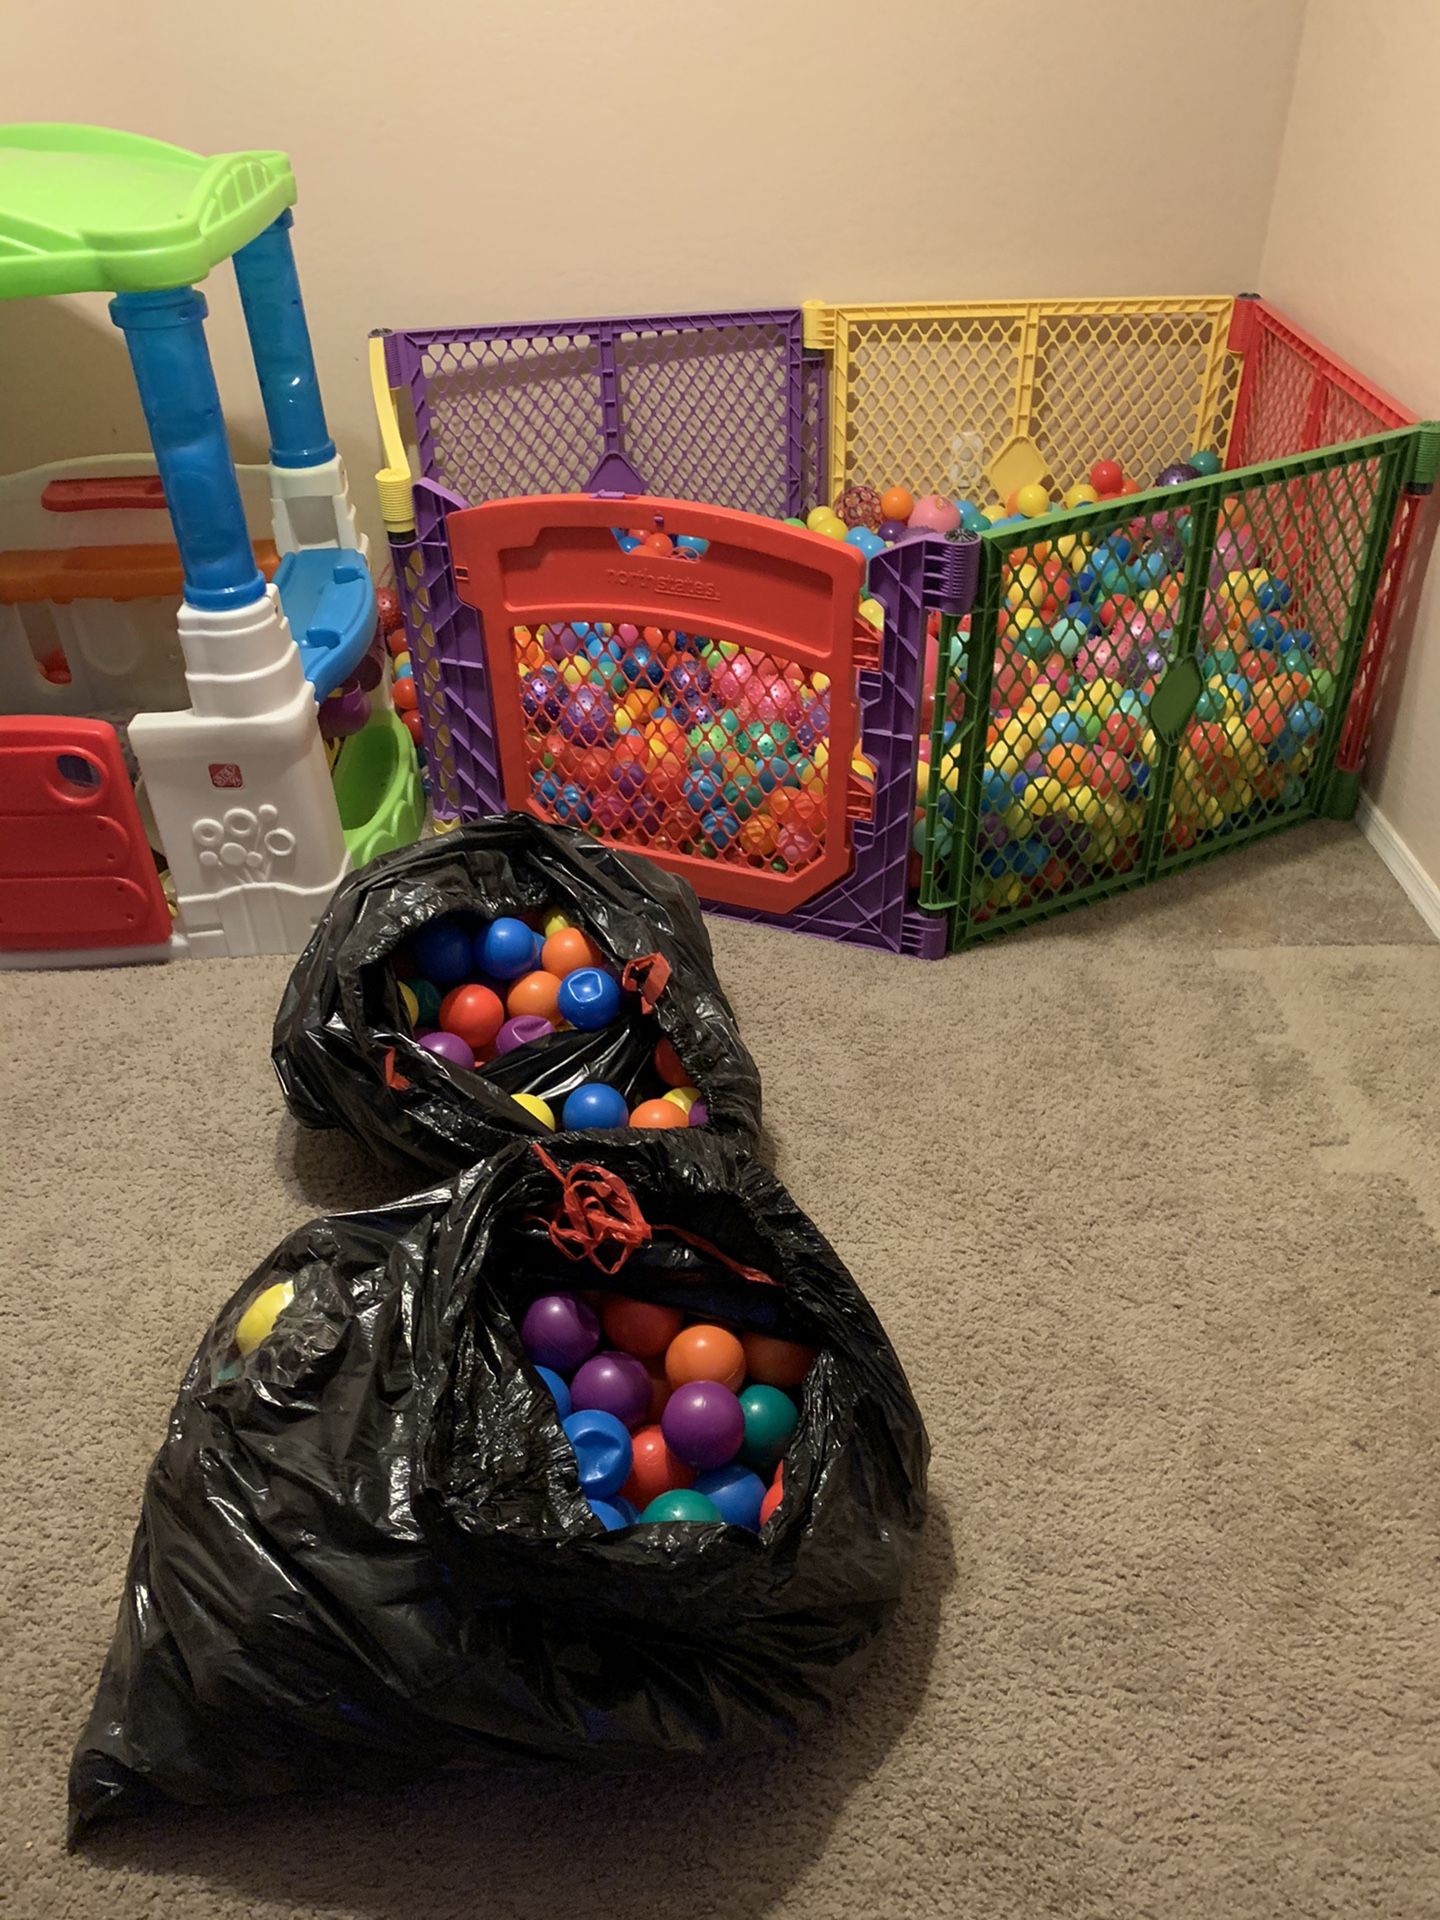 Ball pit with over 1500 balls.